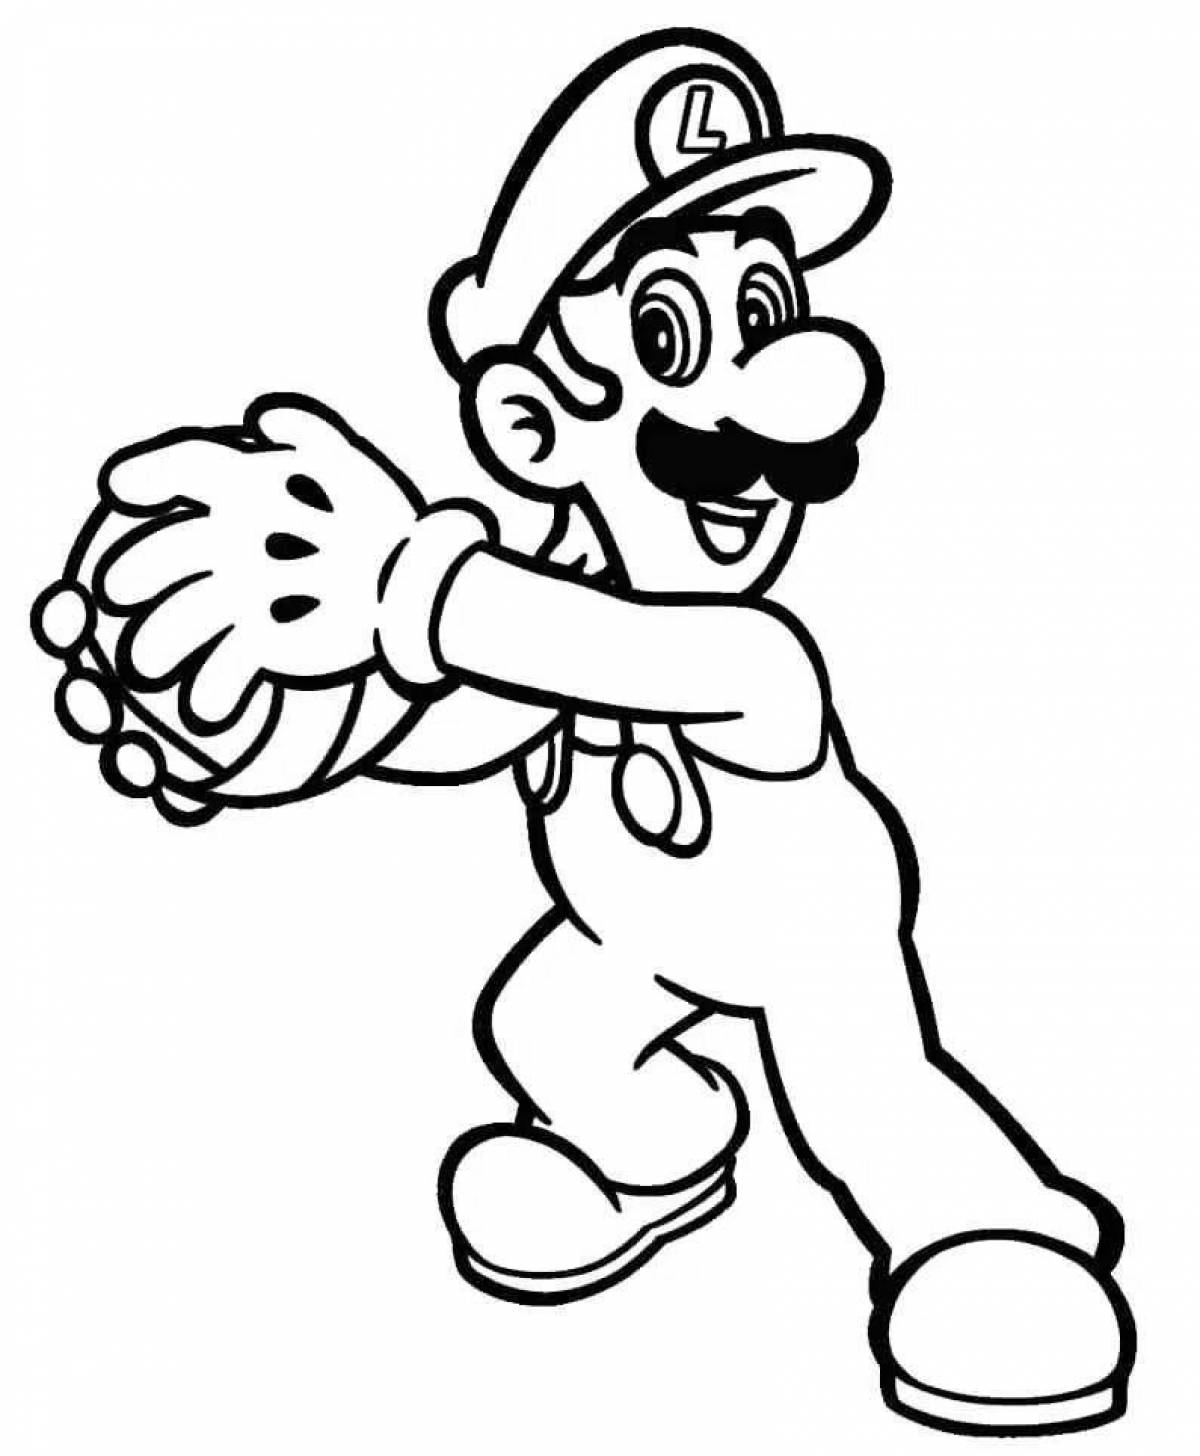 Amazing luigi and mario coloring pages